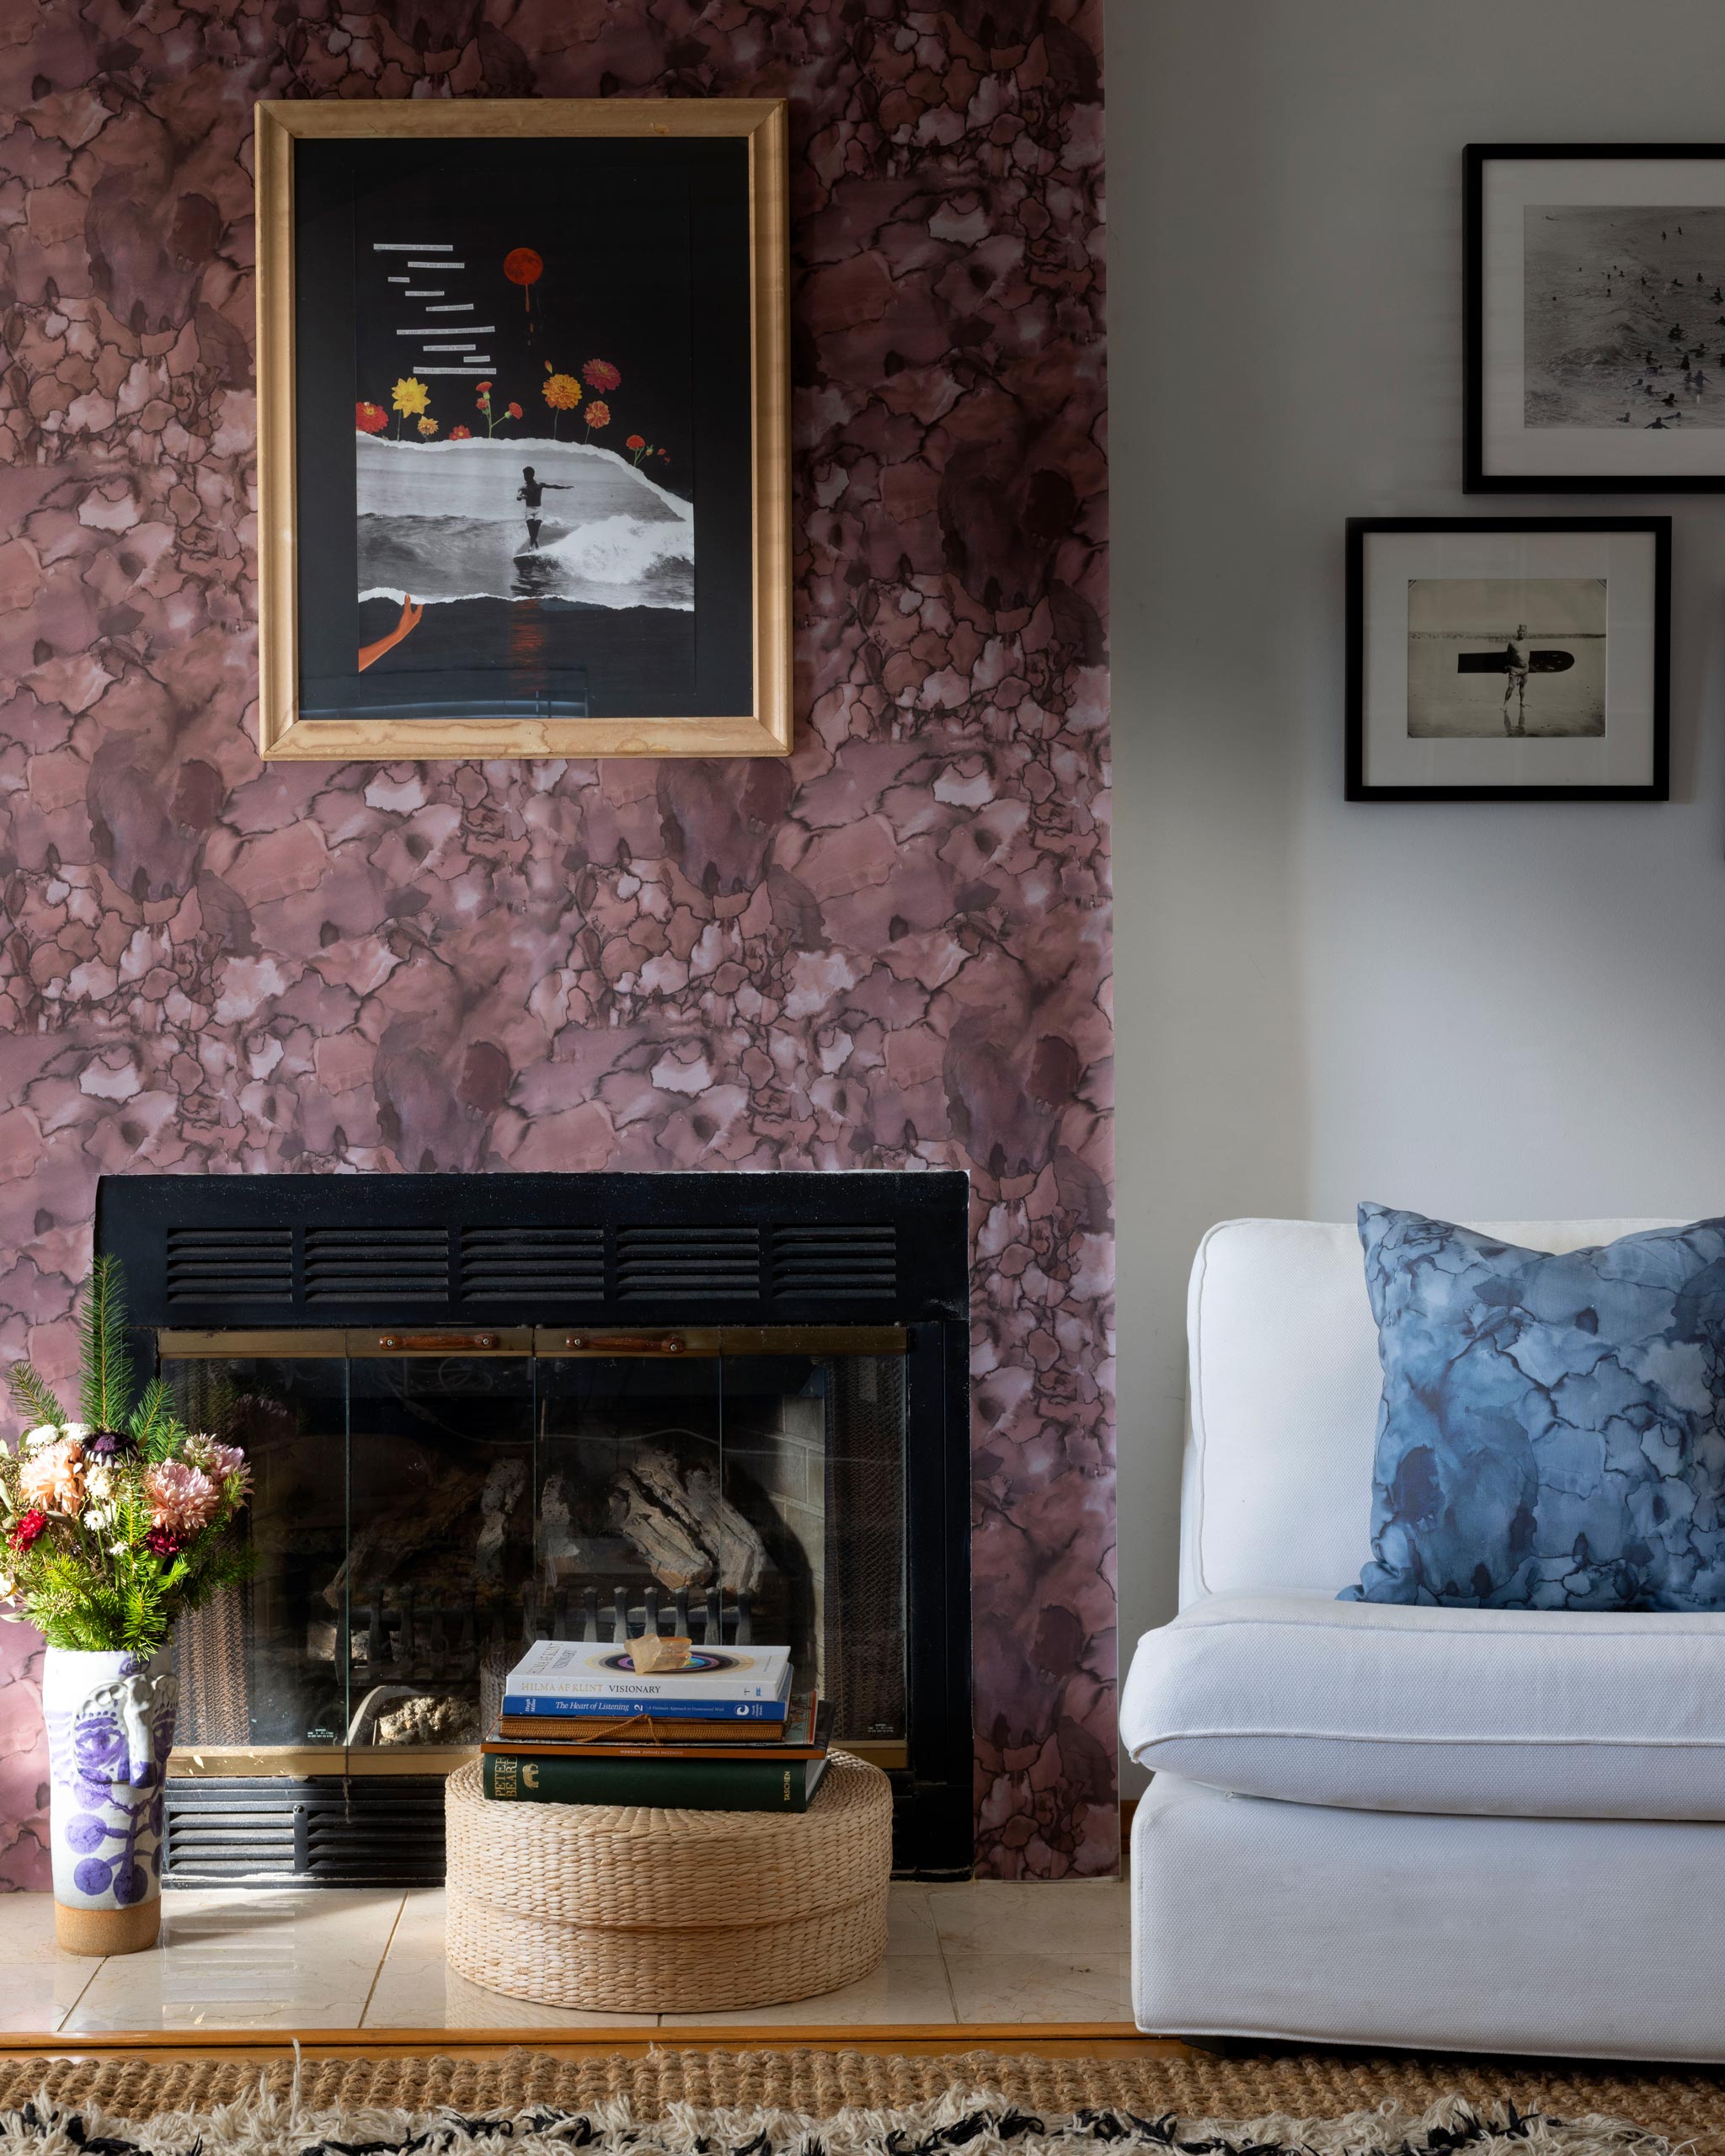 A maximalist living room tableau with a statement wall papered in an abstract textural print in red, gray and black.